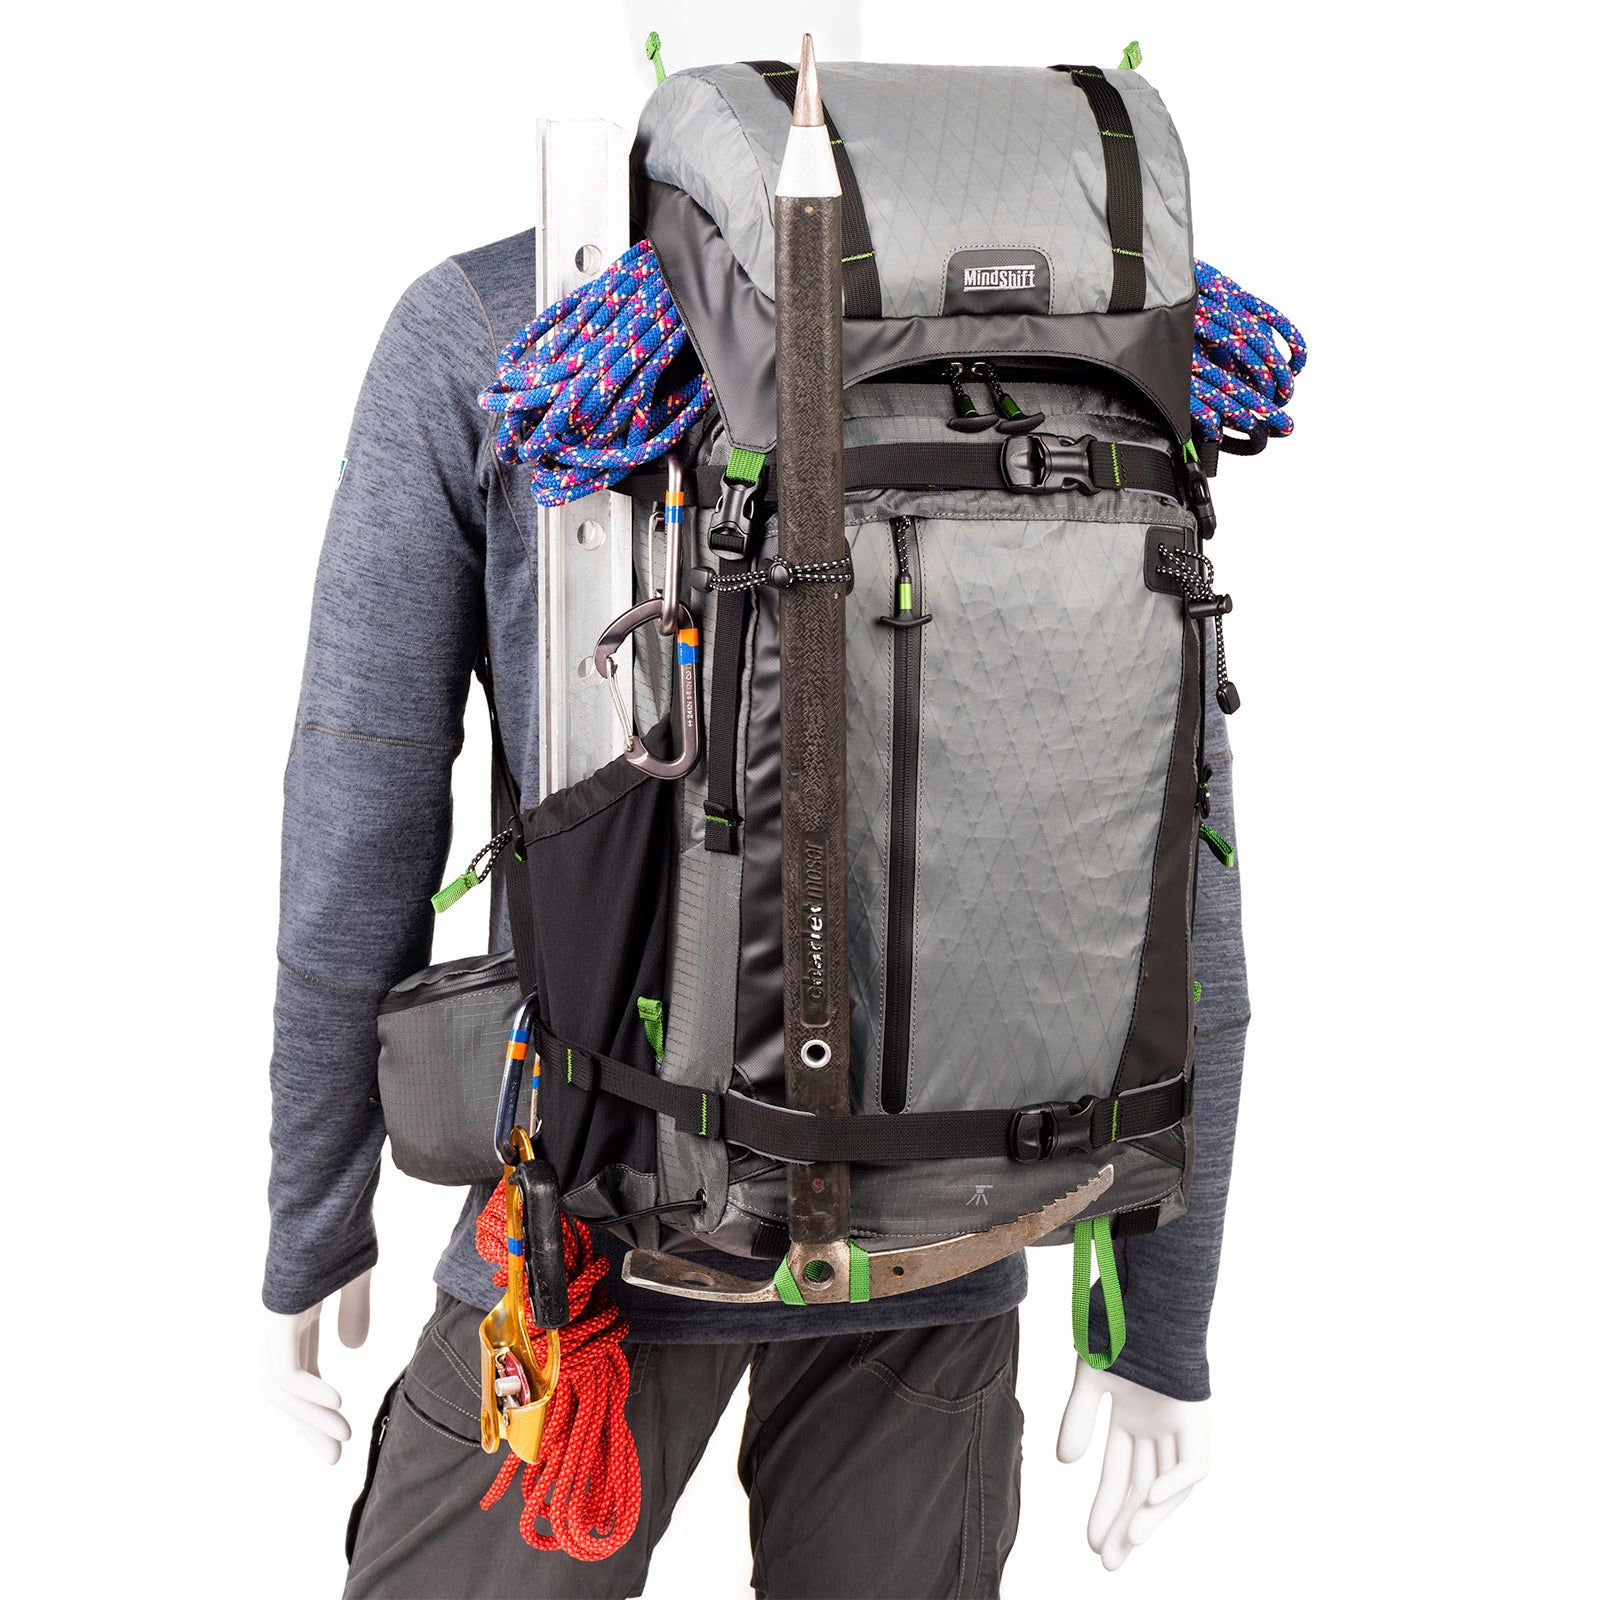  Expandable capacity on all five sides with daisy chain, ice axe loops and additional lash points